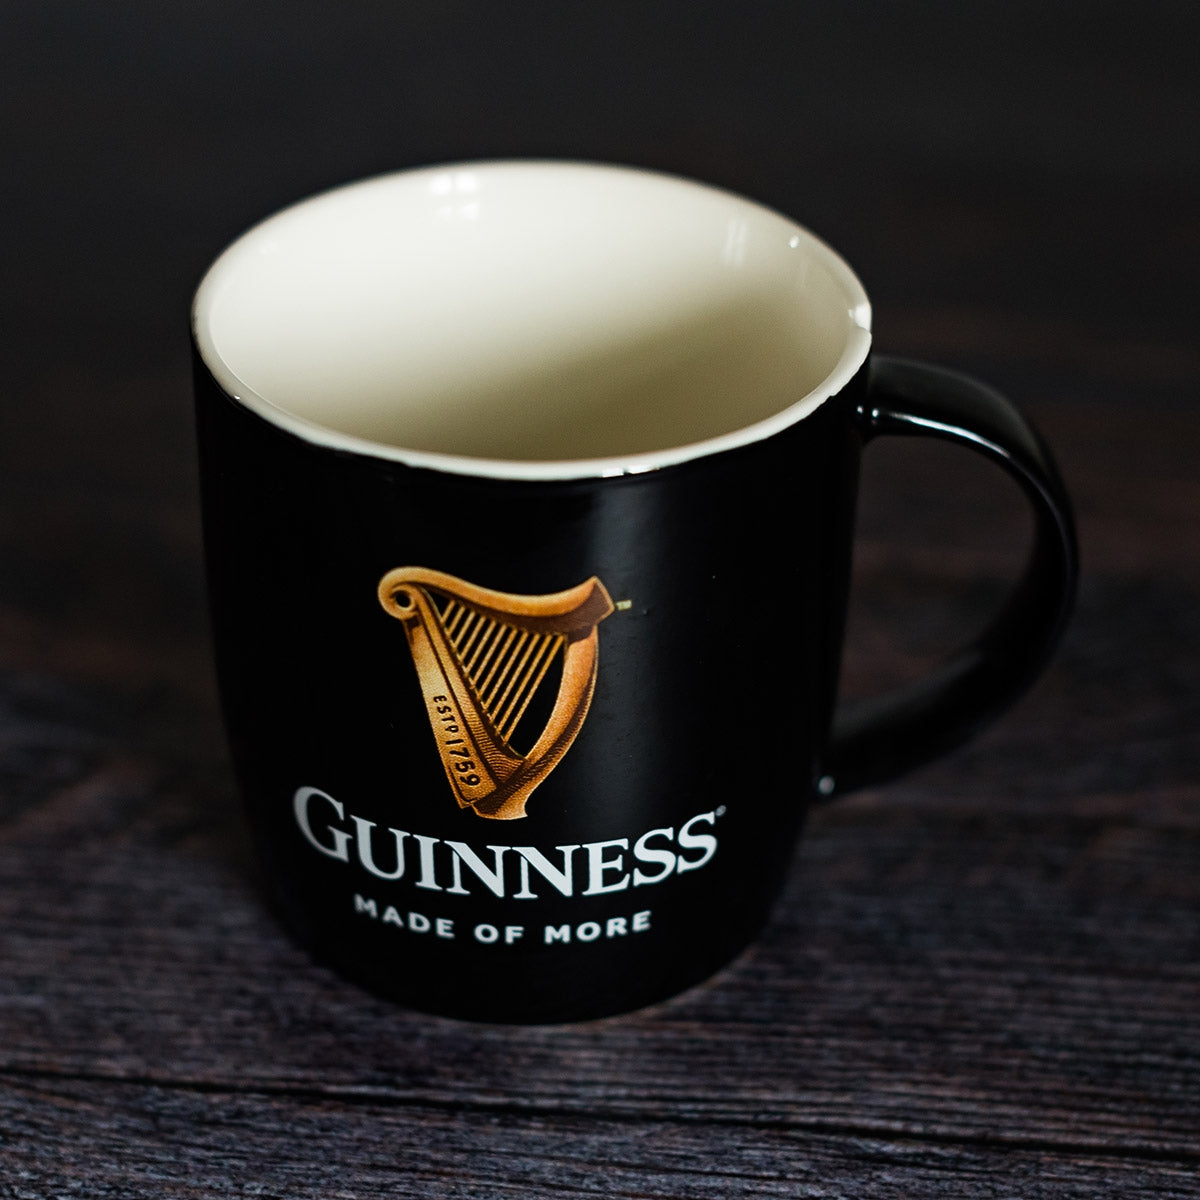 Guinness Black Mug with Official Harp Logo by Guinness on a wooden table.